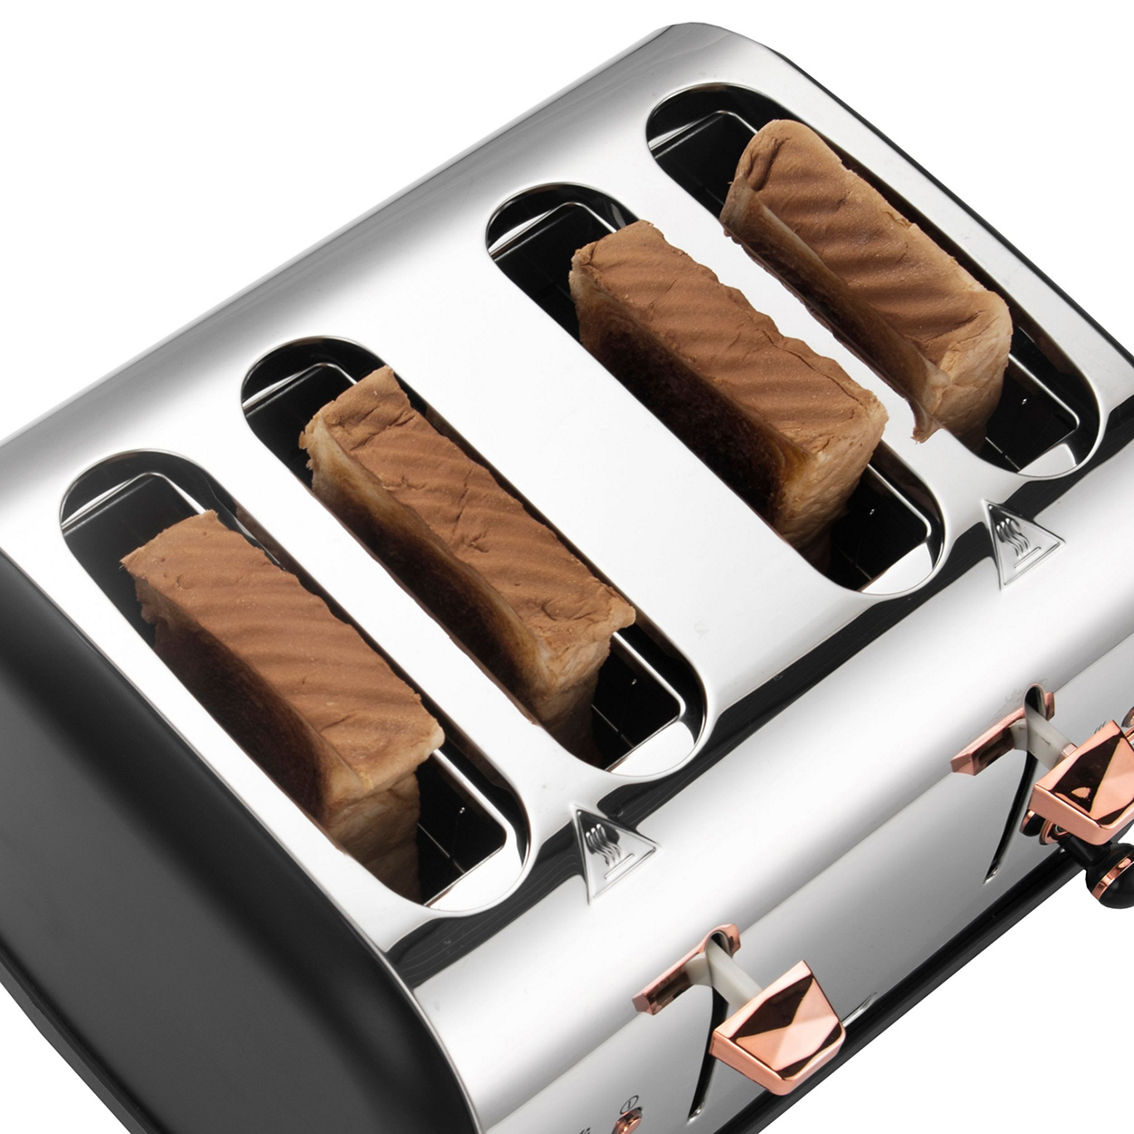 MegaChef 4 Slice Wide Slot Toaster with Variable Browning in Black and Rose Gold - Image 2 of 5